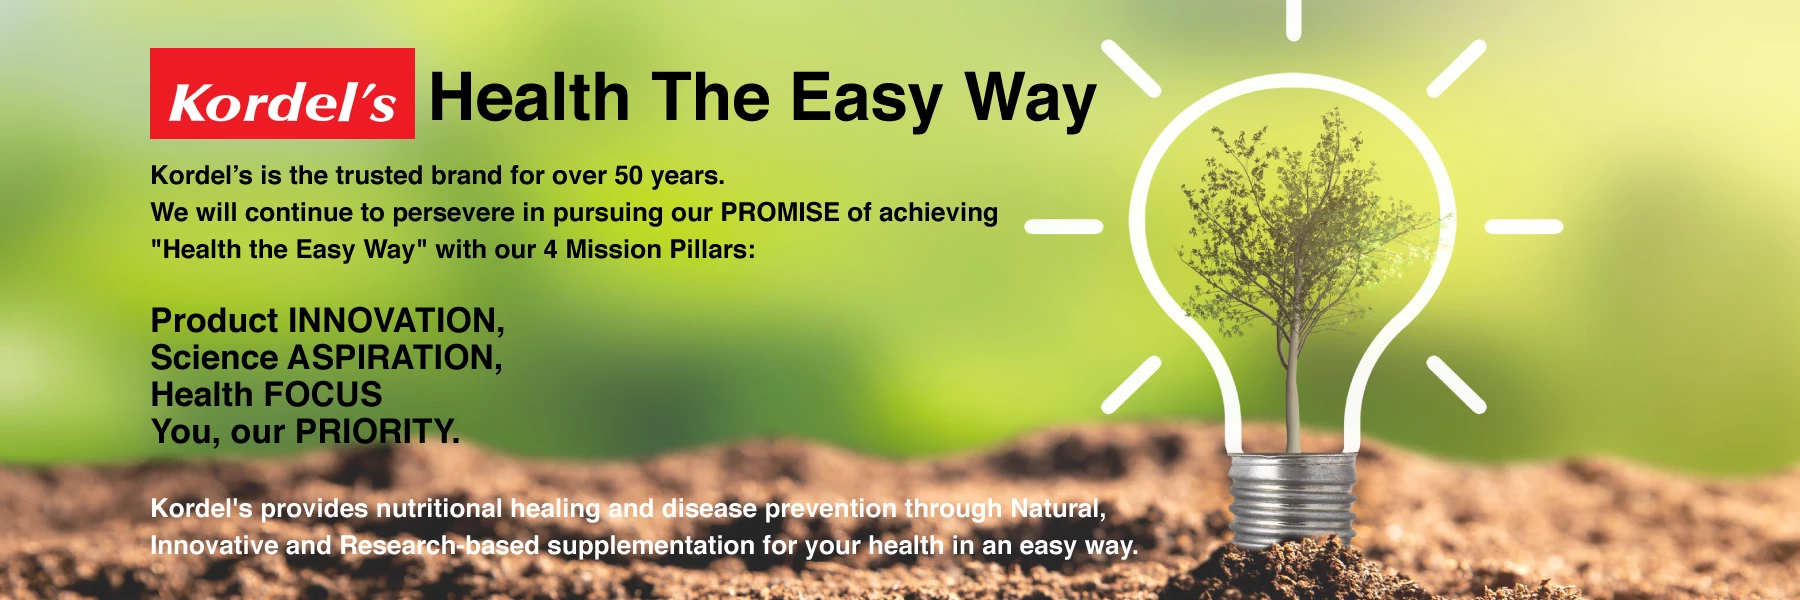 Homepage Banner - Health The Easy Way